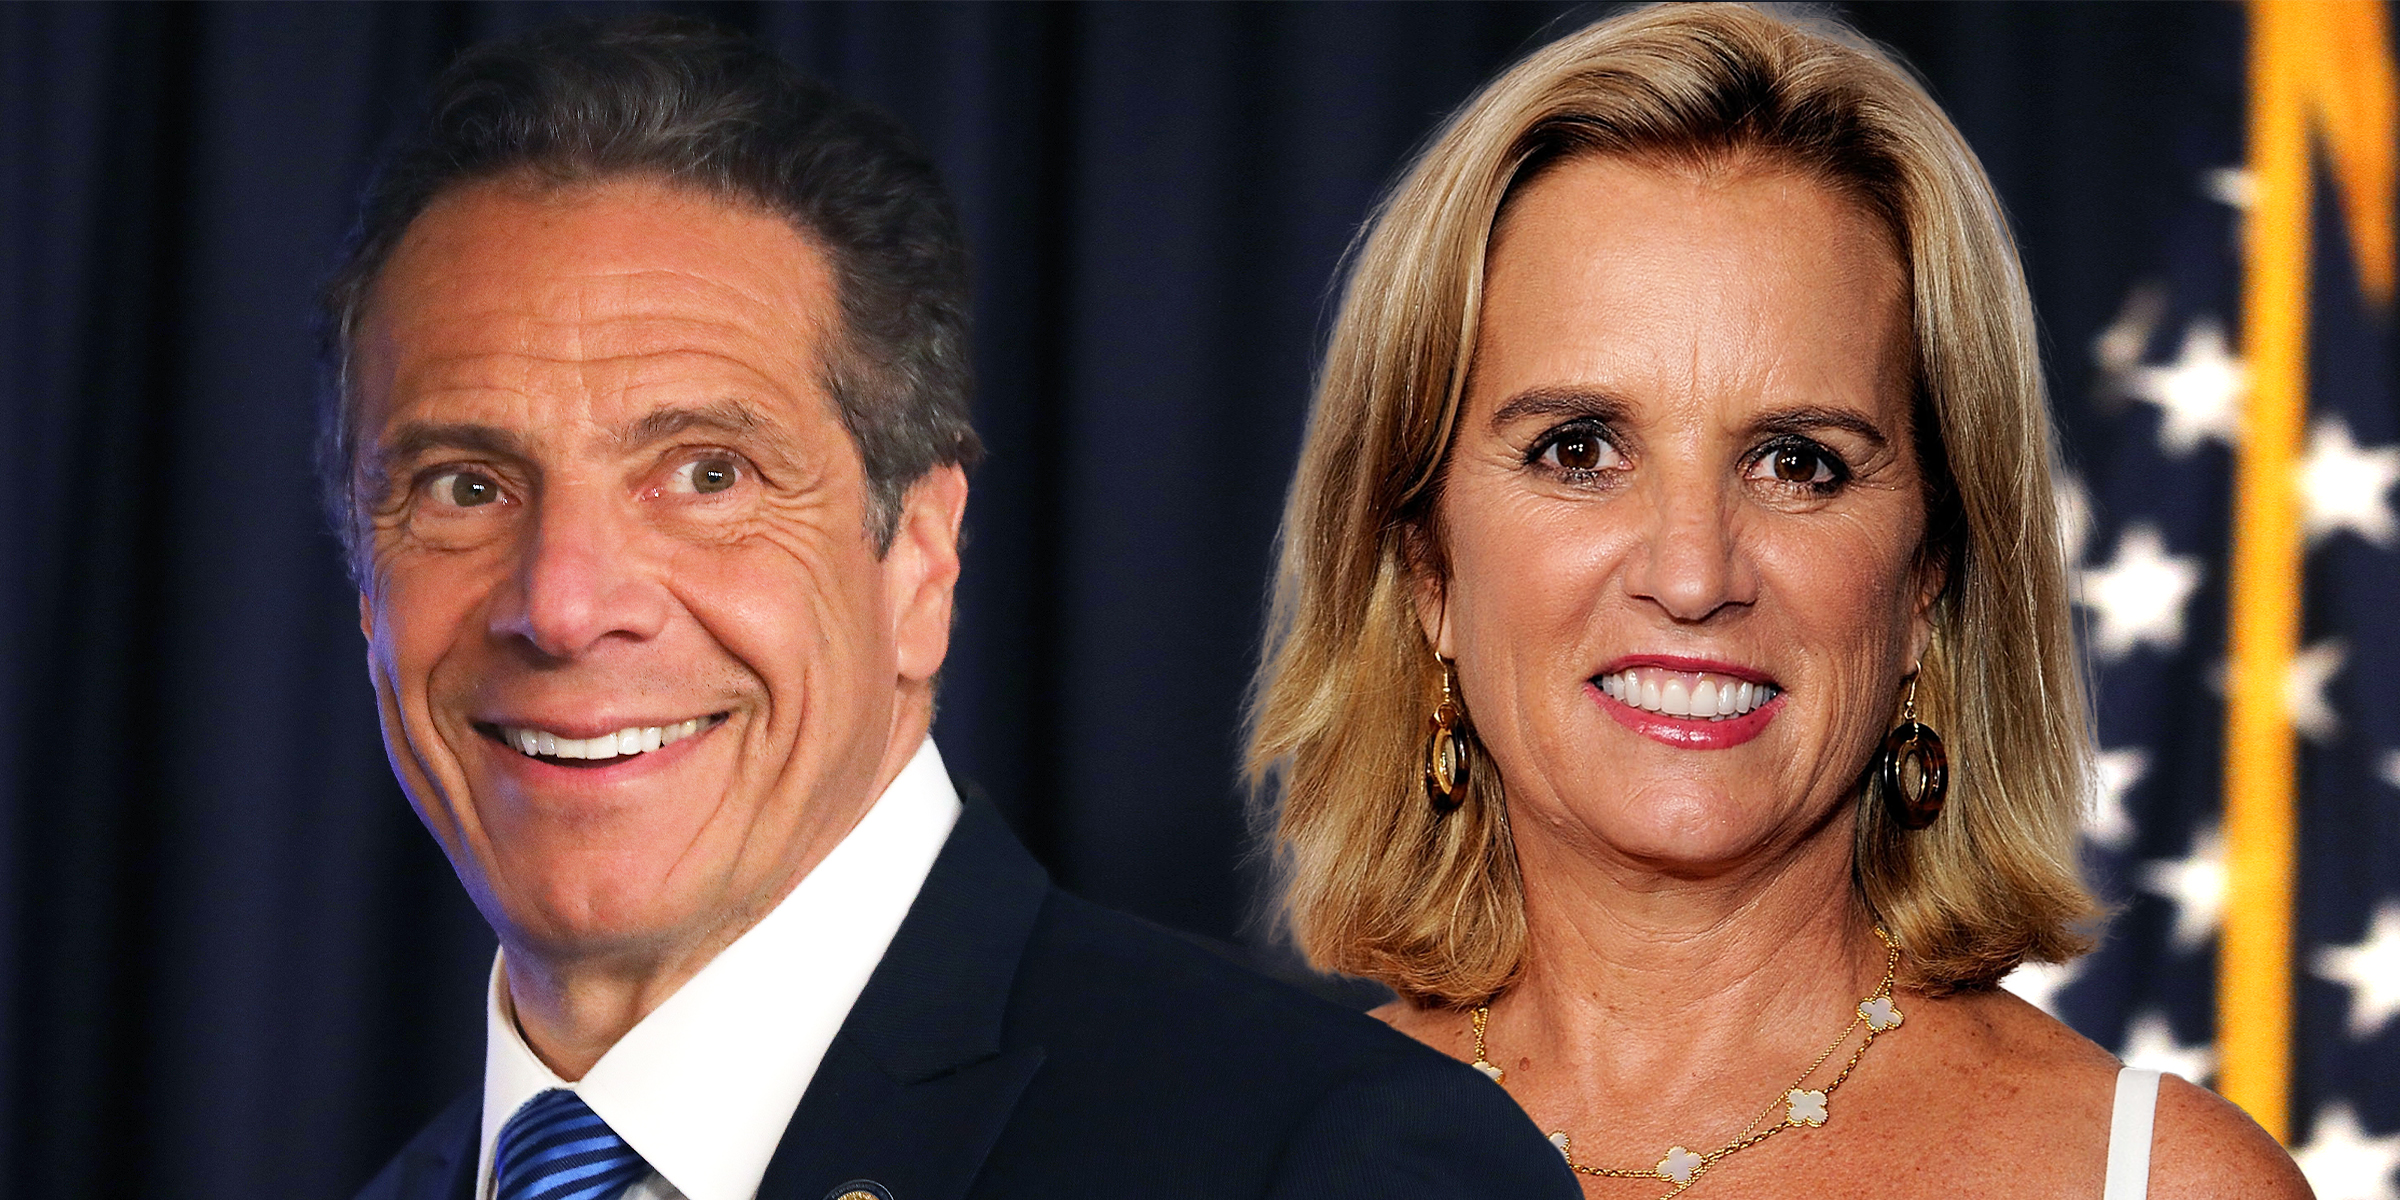 Andrew Cuomo | Kerry Kennedy | Source: Getty Images